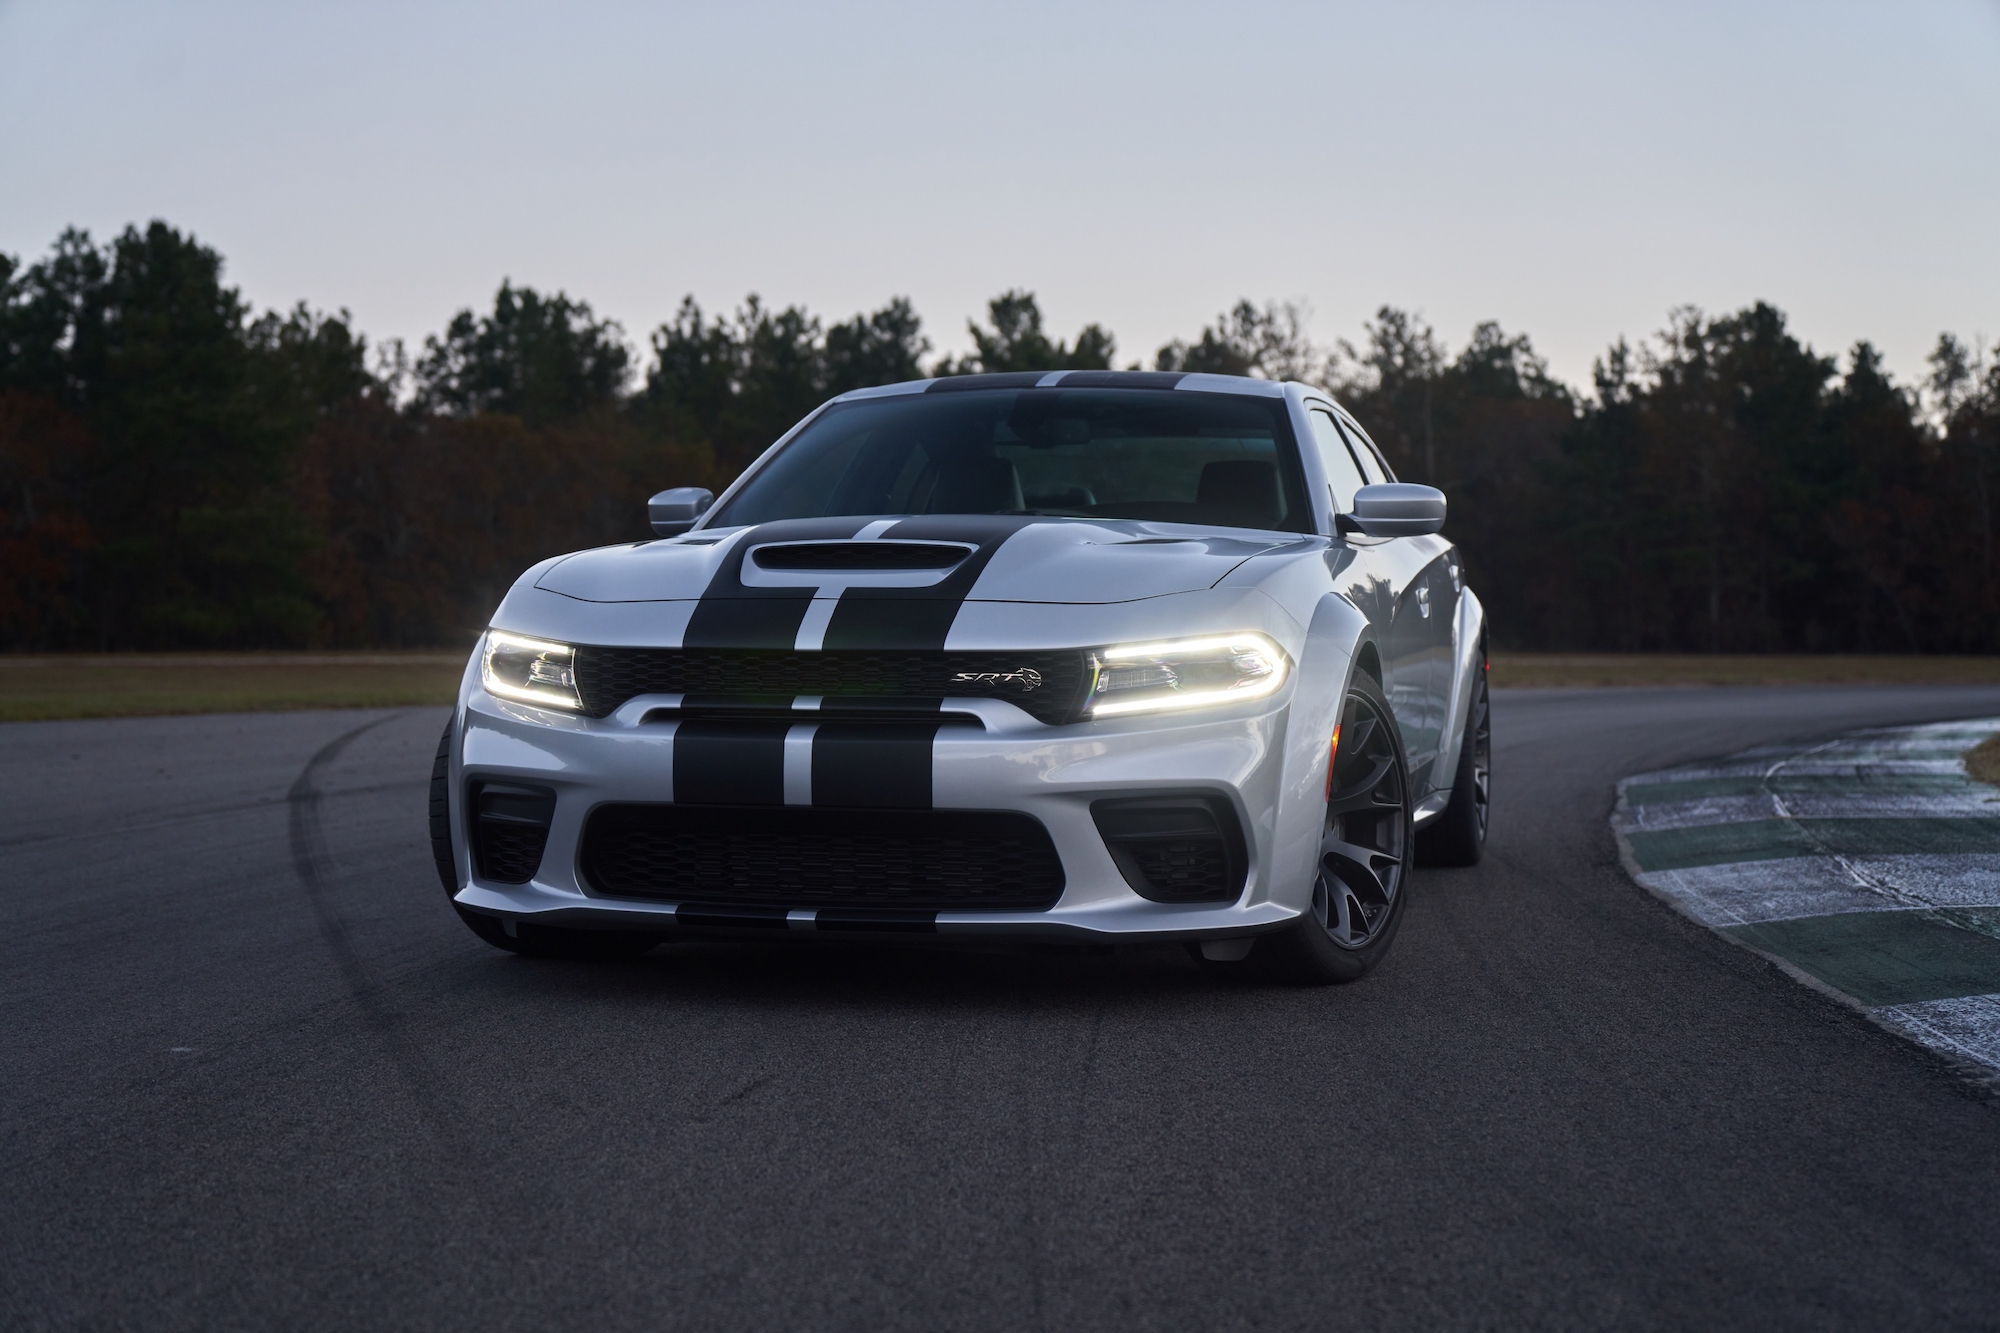 2021 Dodge Charger SRT Hellcat Redeye: The most powerful and fastest mass-produced sedan in the world with 797 hp, shown here in Triple Nickel with Dual Carbon stripes.